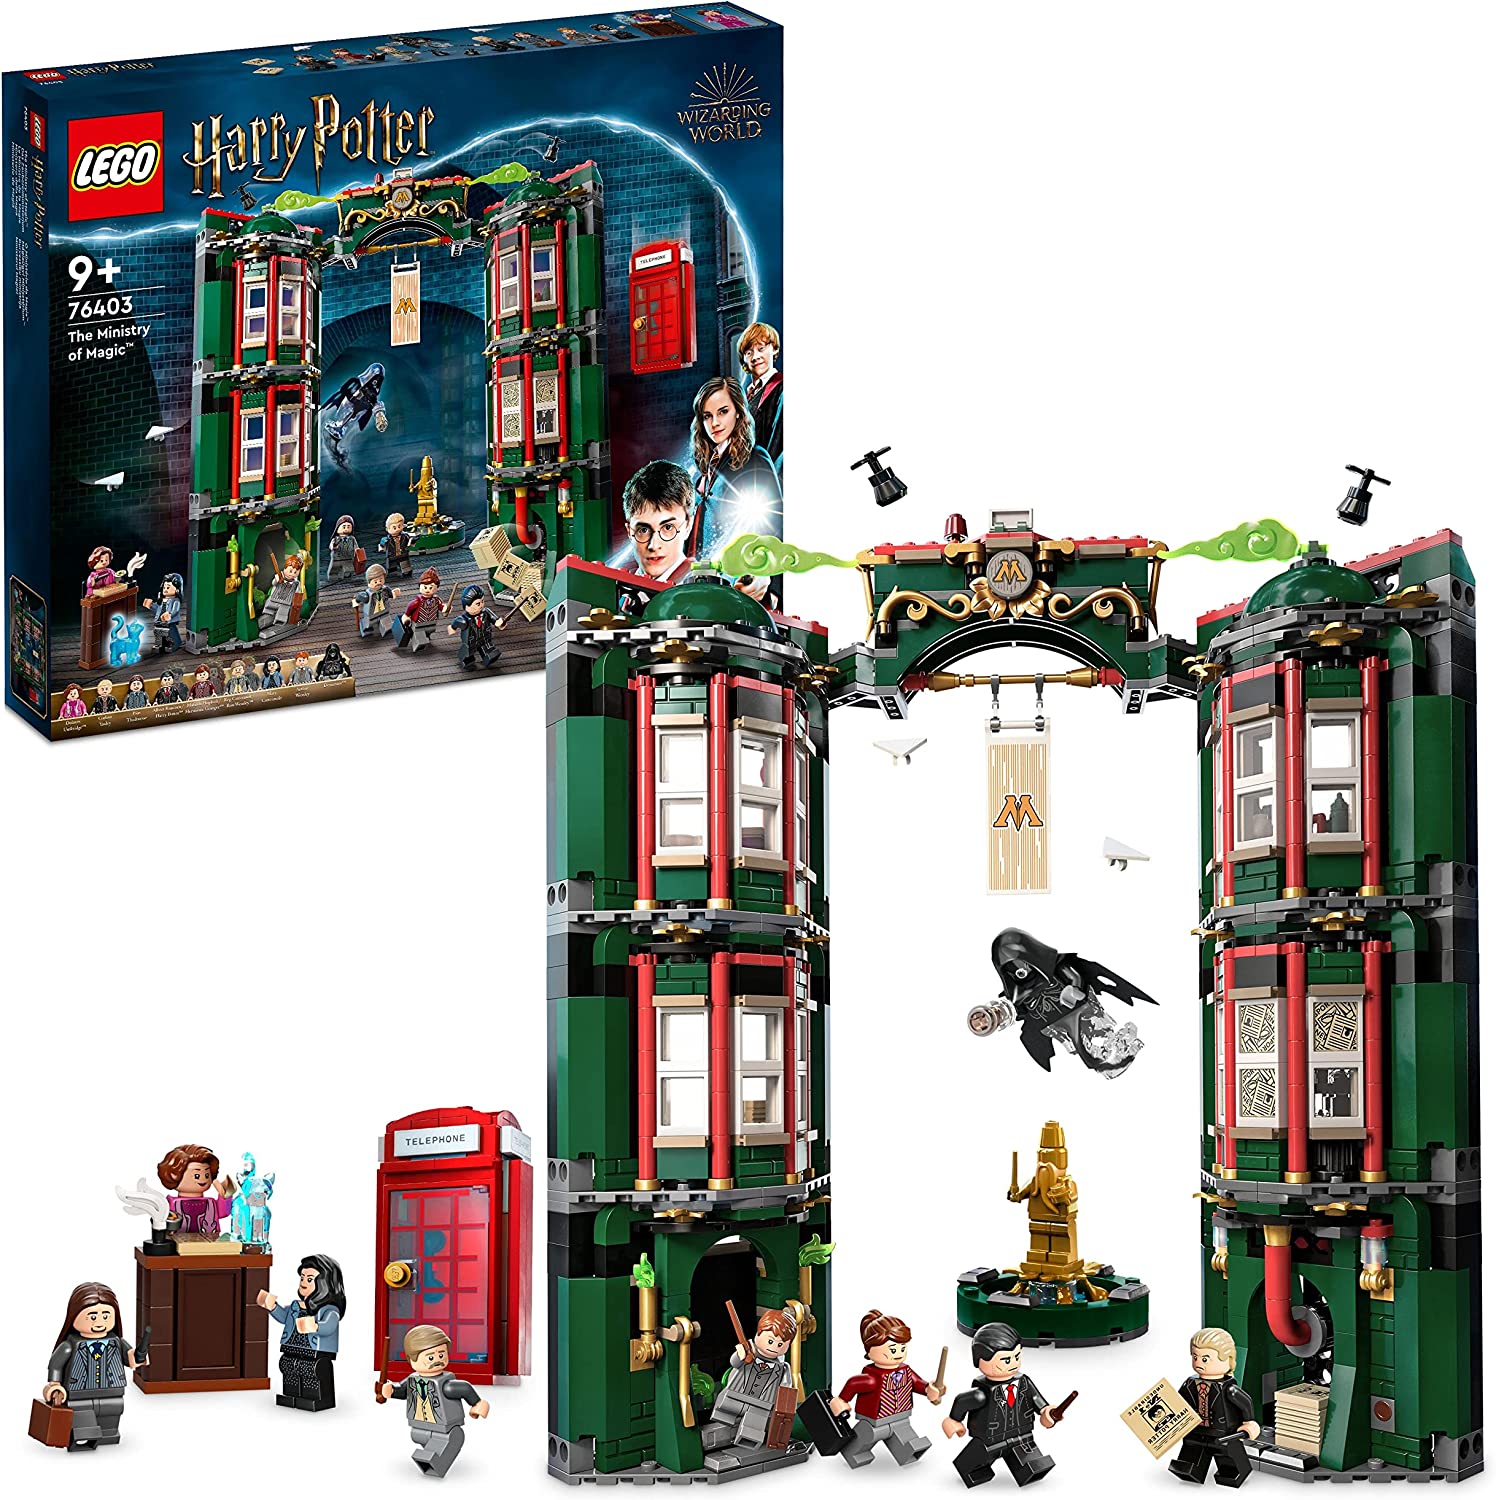 LEGO 76403 Harry Potter Ministry of Magic Modular Set for Building with Minifigures and Conversion Mechanism, Gift for Collectors